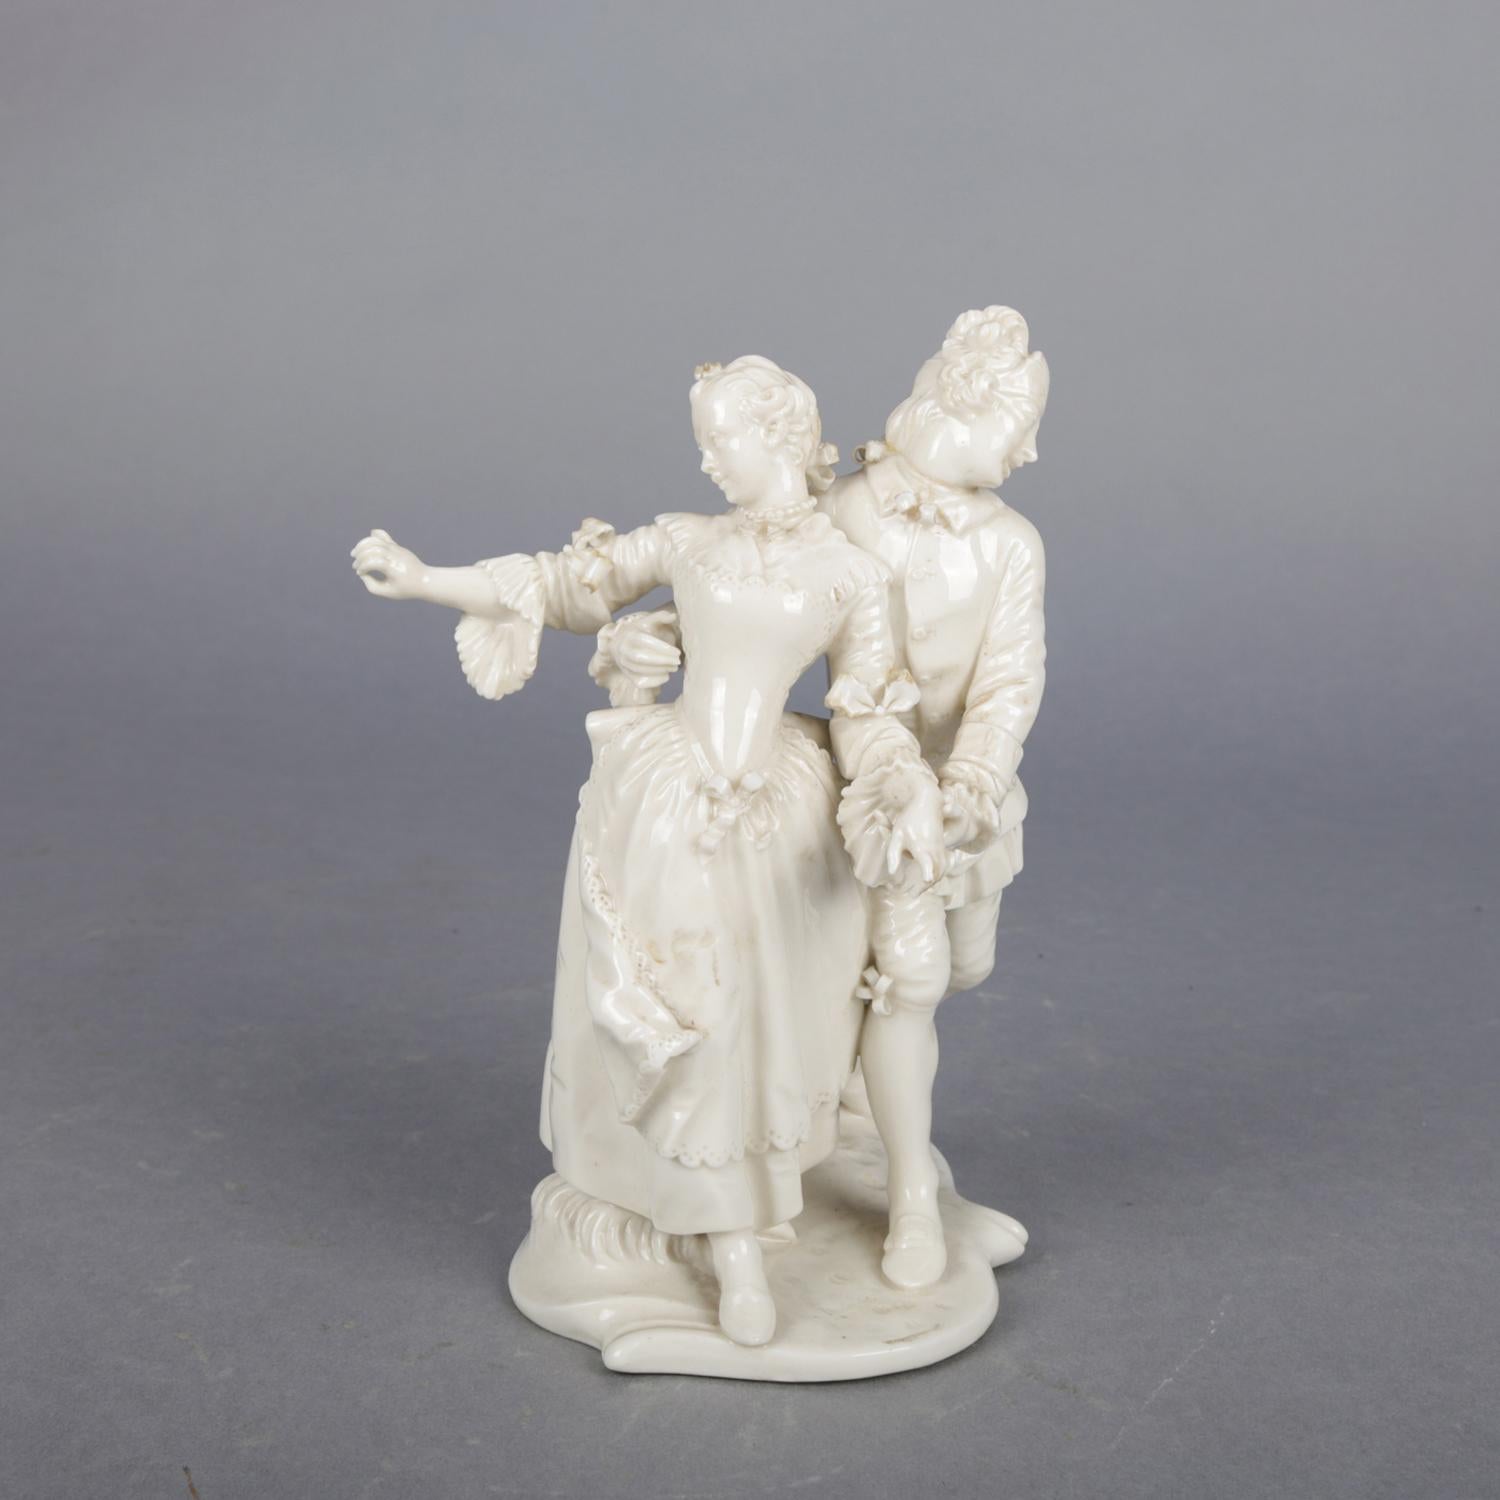 Glazed Antique & Petite German Figural Blanc de Chine Grouping, Dancing Courting Couple